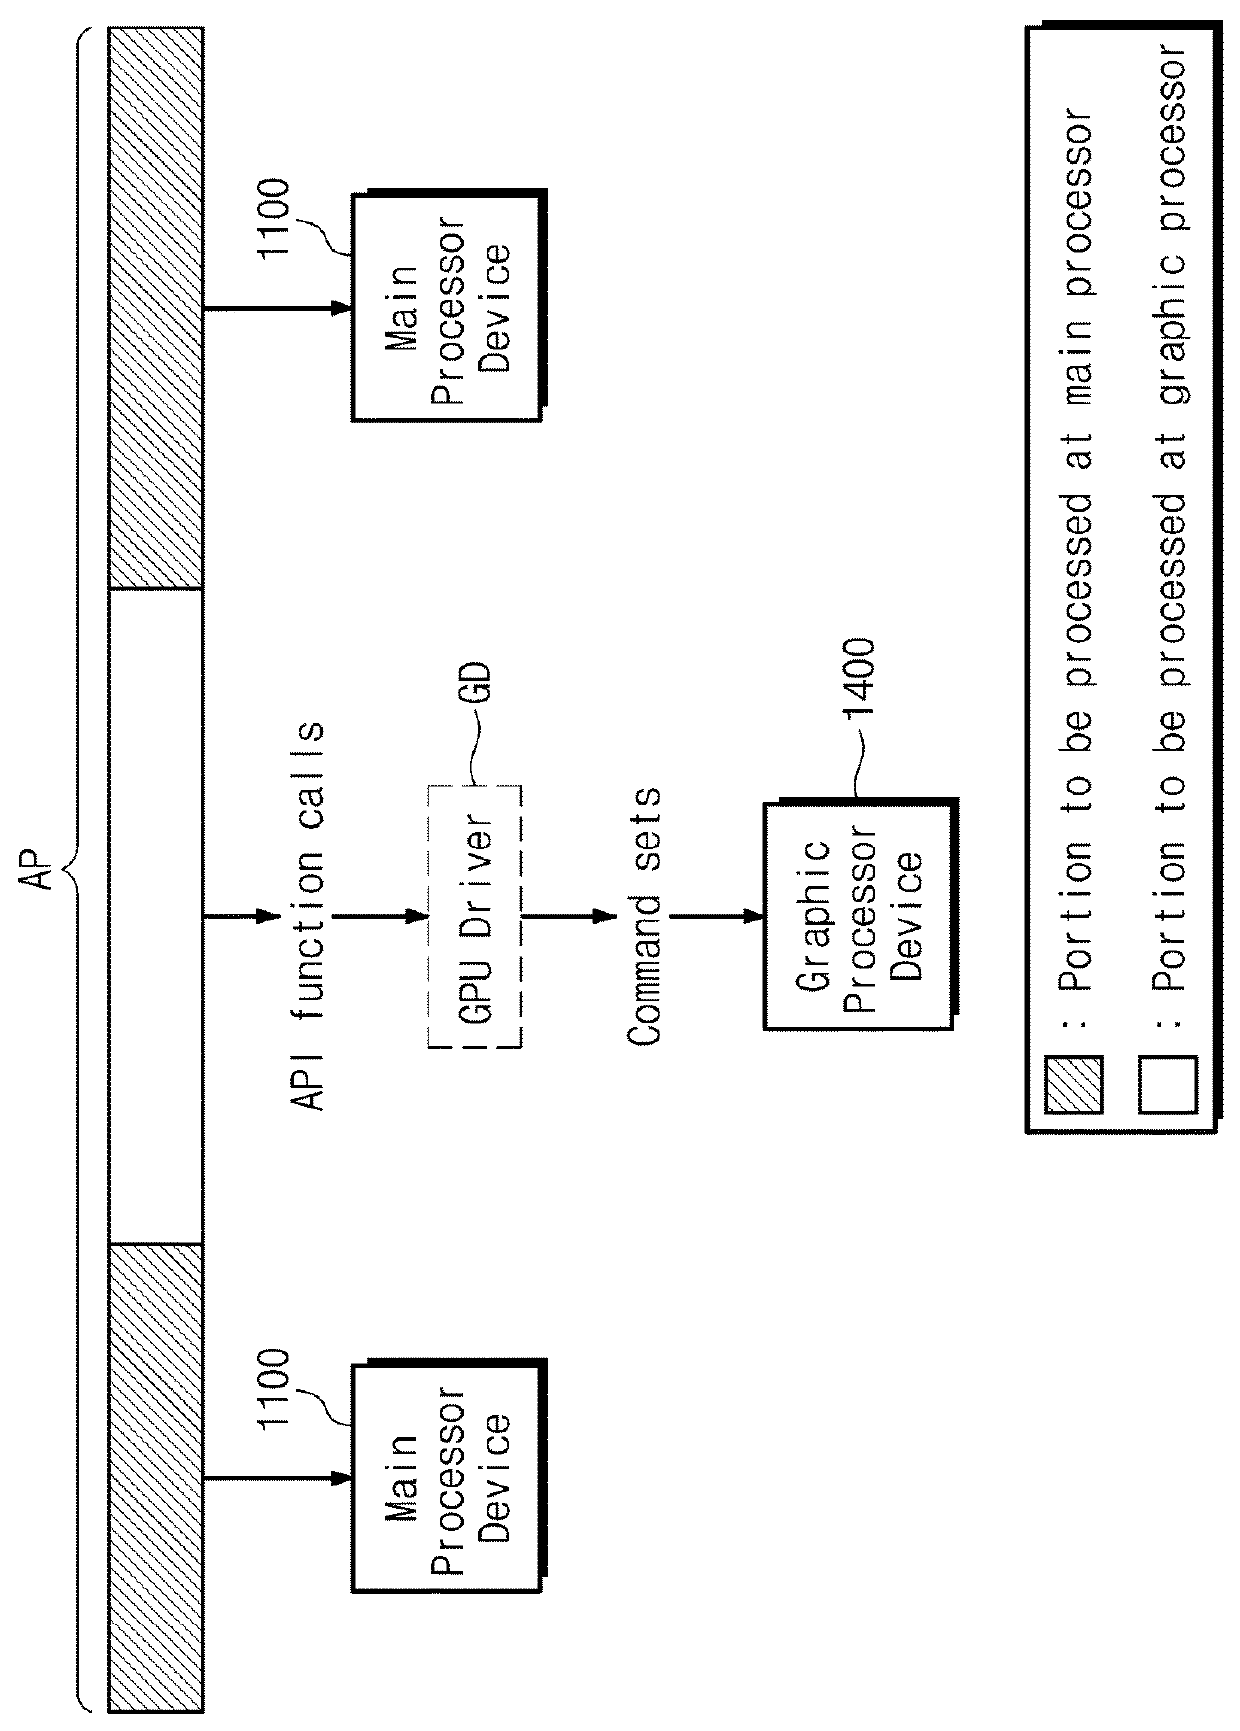 Processor device collecting performance information through command-set-based replay